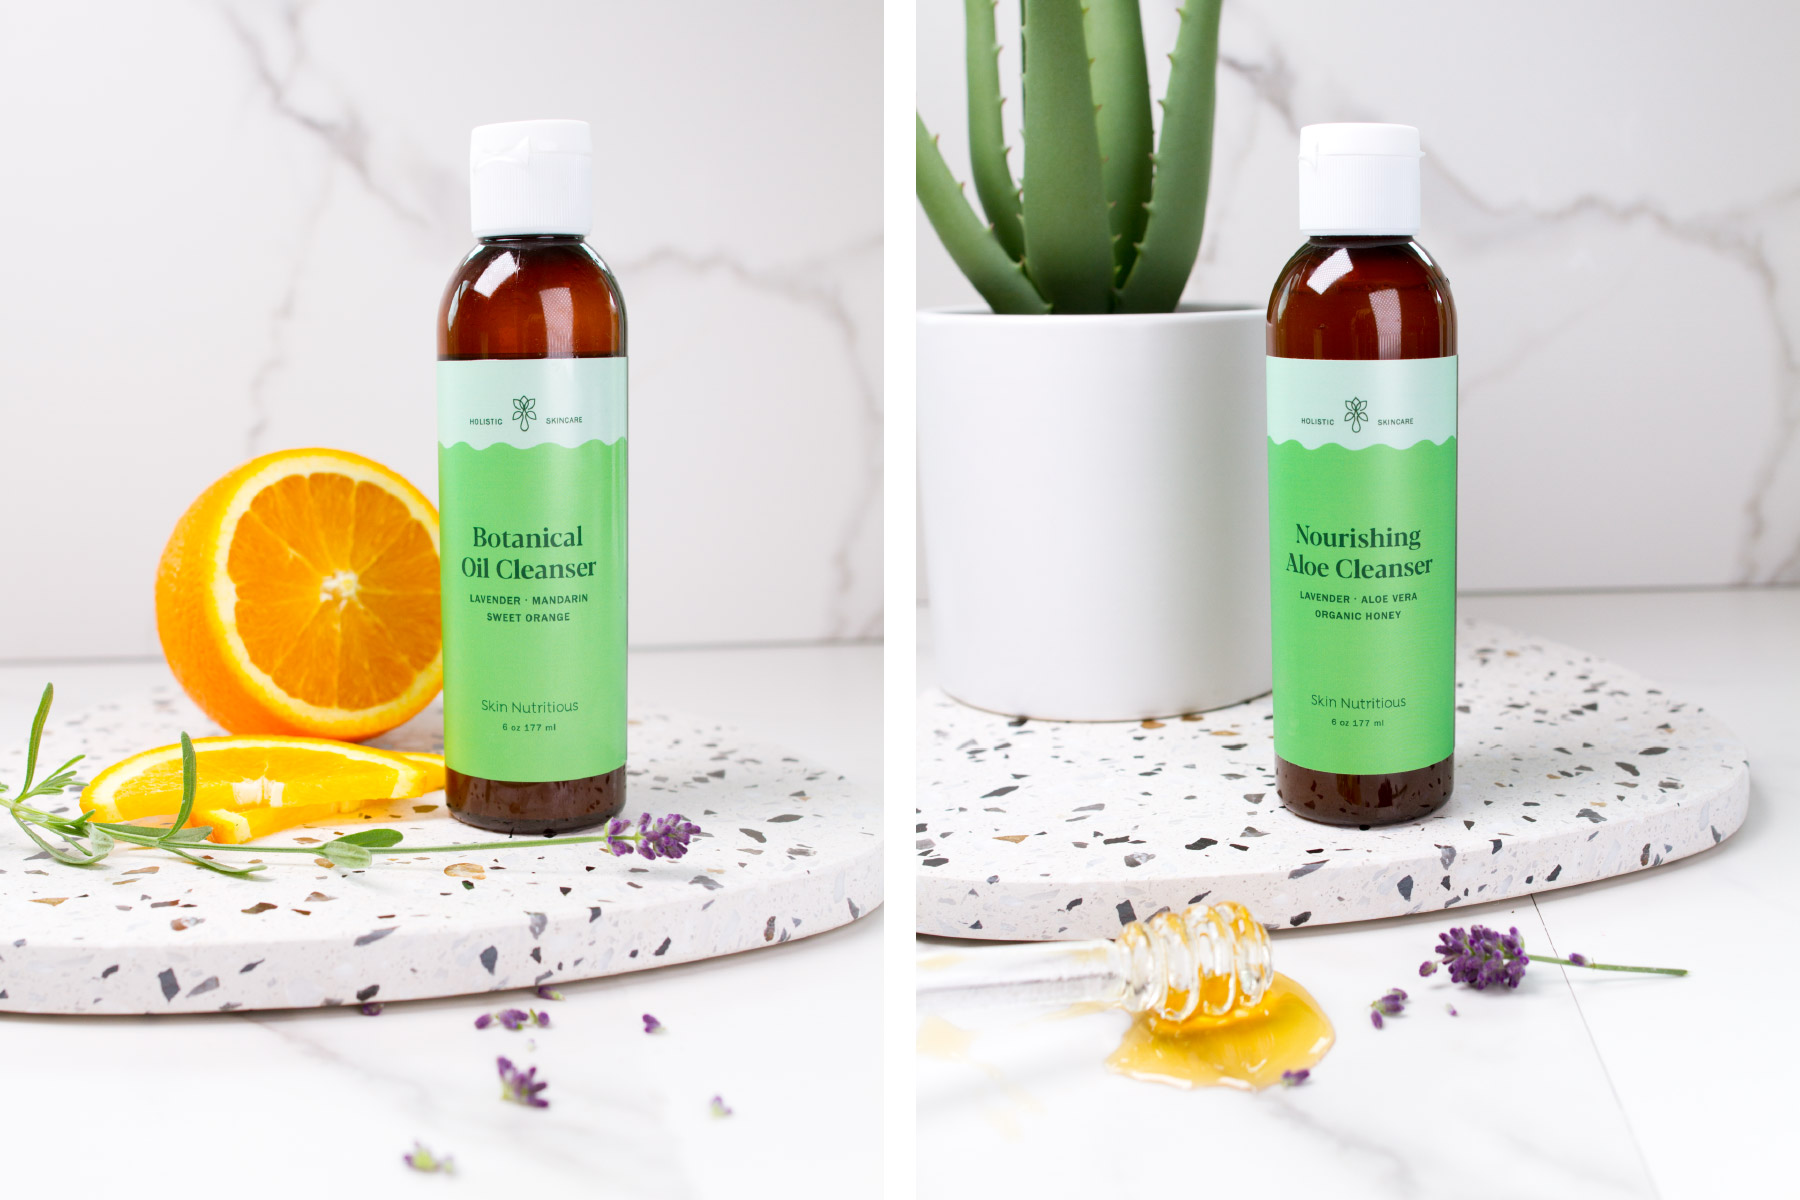 holistic skincare products with natural ingredients on a terrazzo and marble background